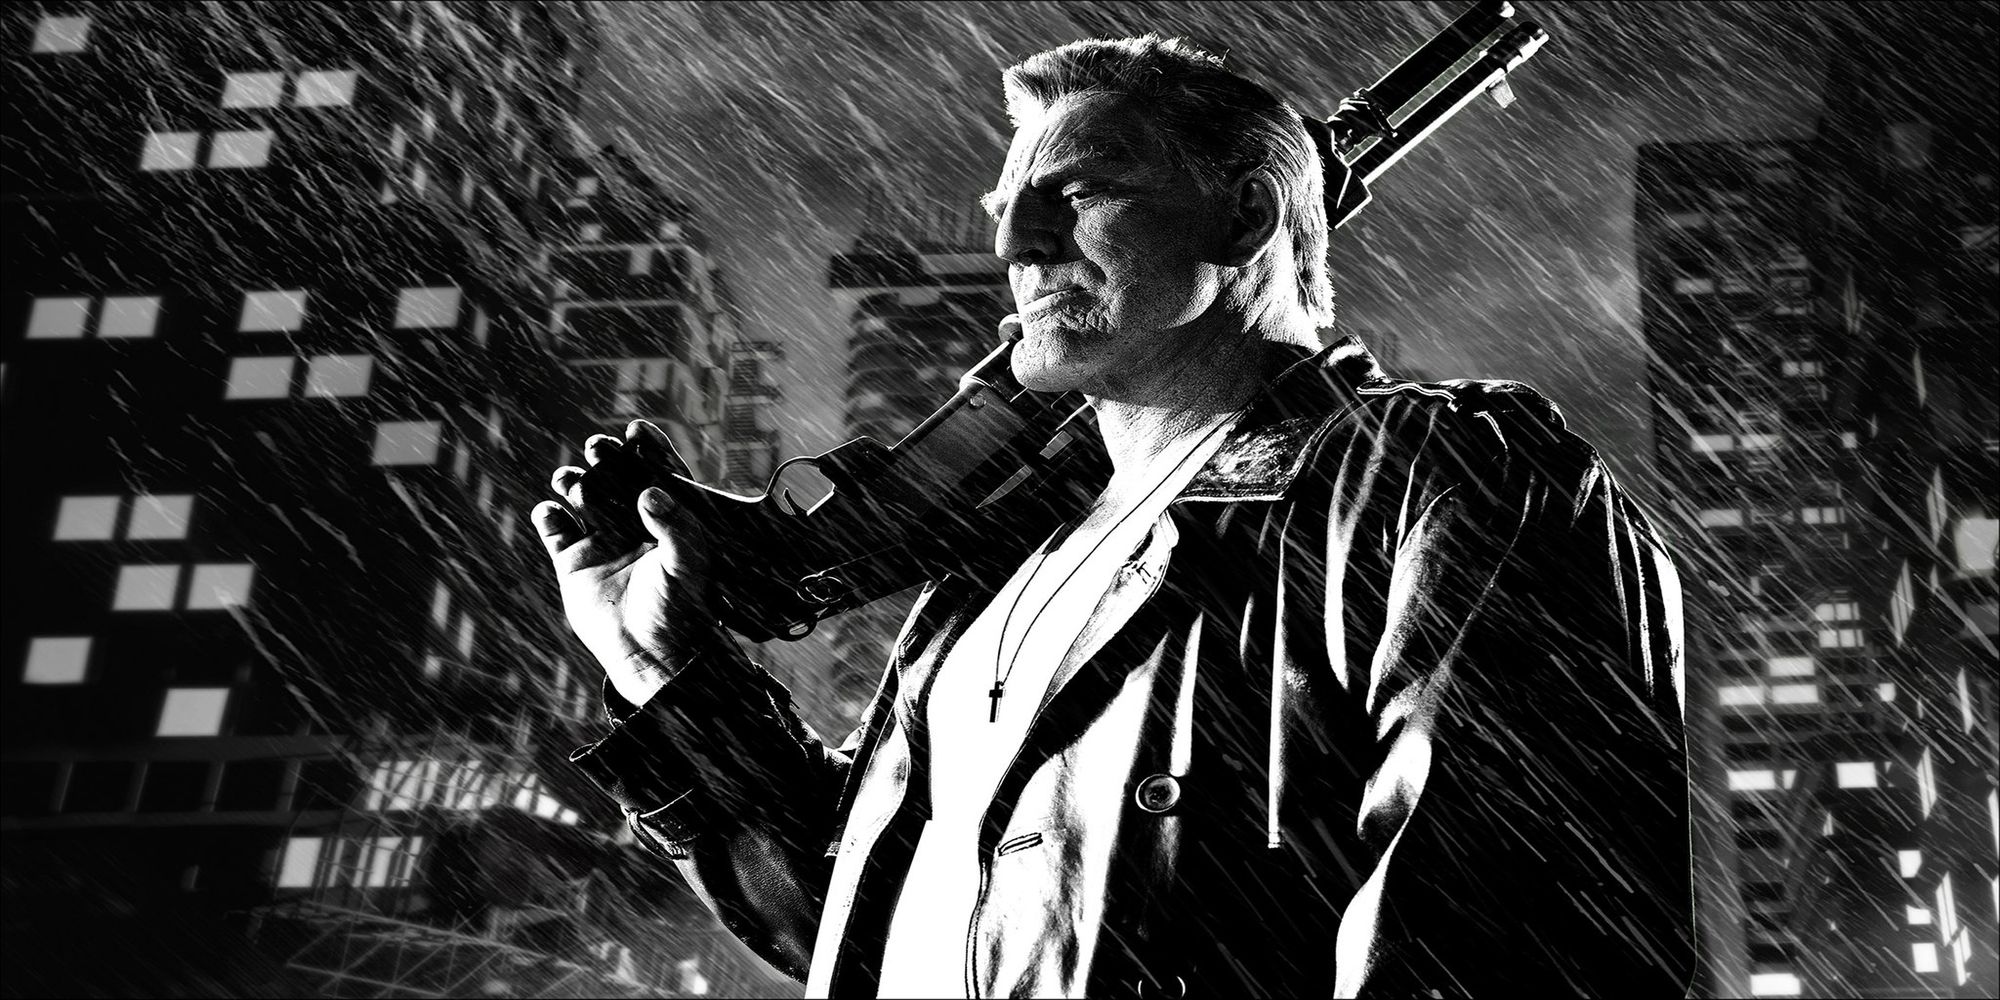 Marv with his gun in Sin City, A Dame To Kill For